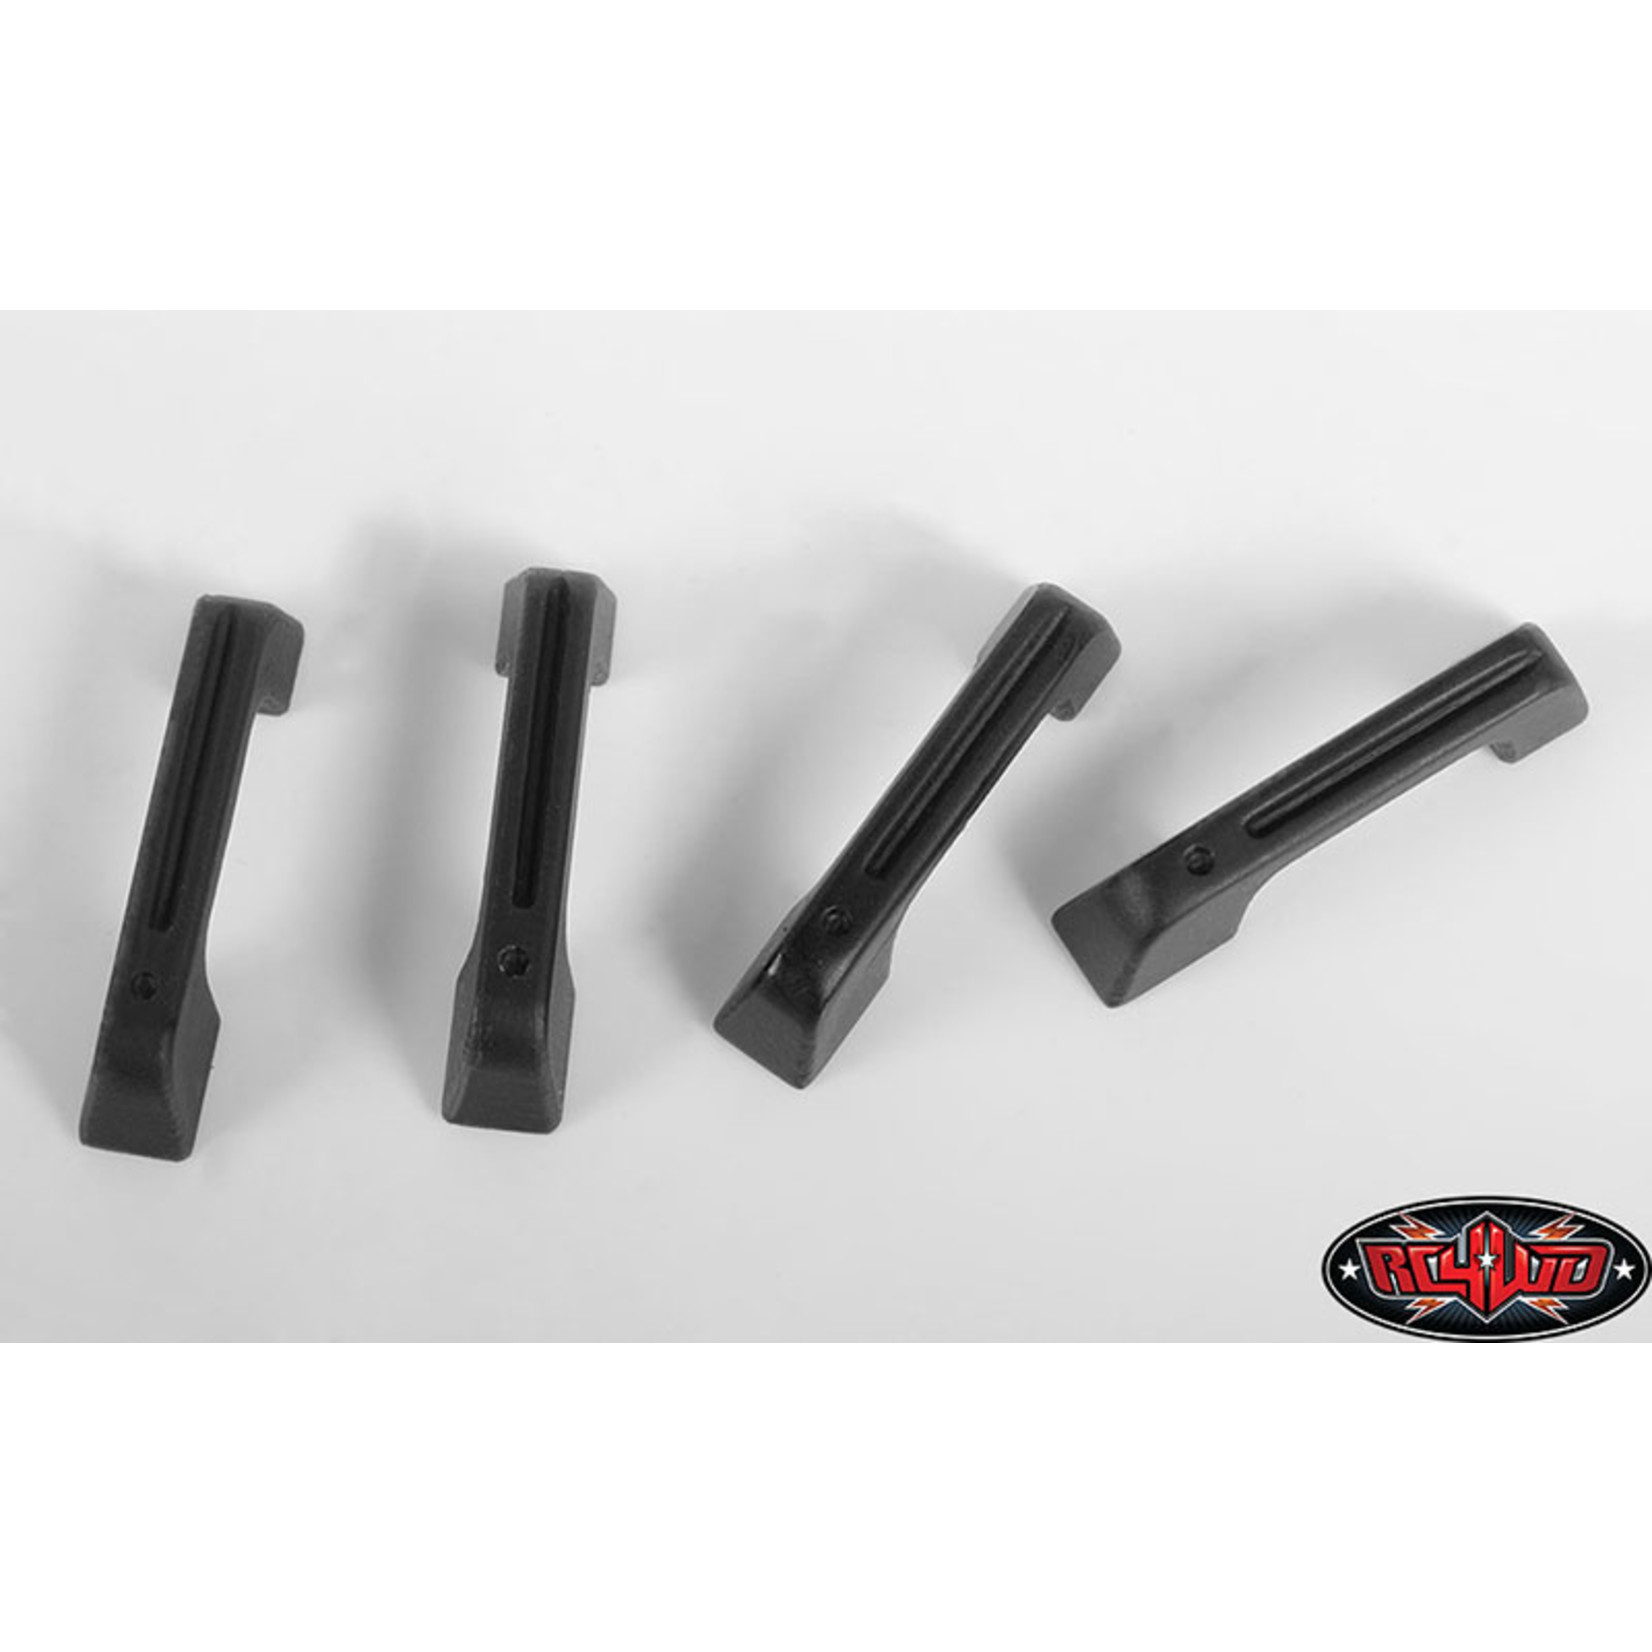 RC4WD RC4VVVC0451 RC4WD Rubber Door Handles for Traxxas TRX-4